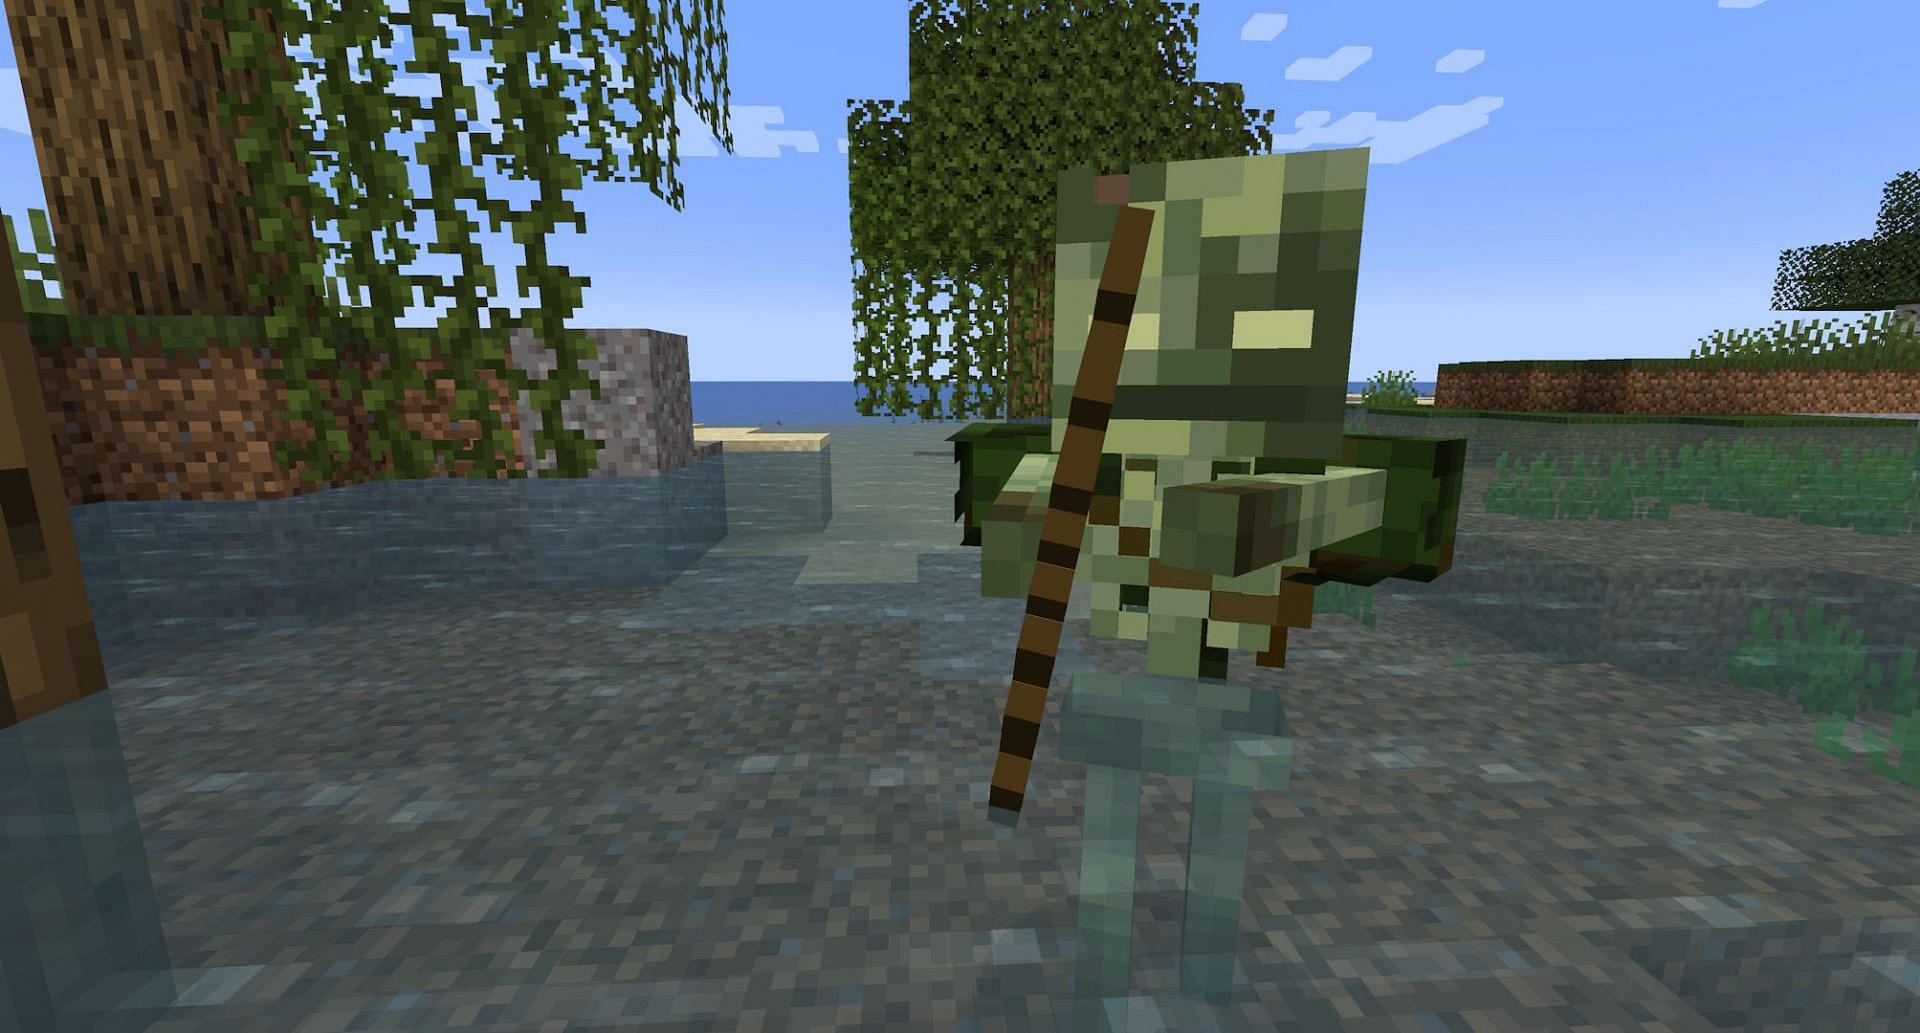 A bogged about to shoot a player (Image via Mojang)